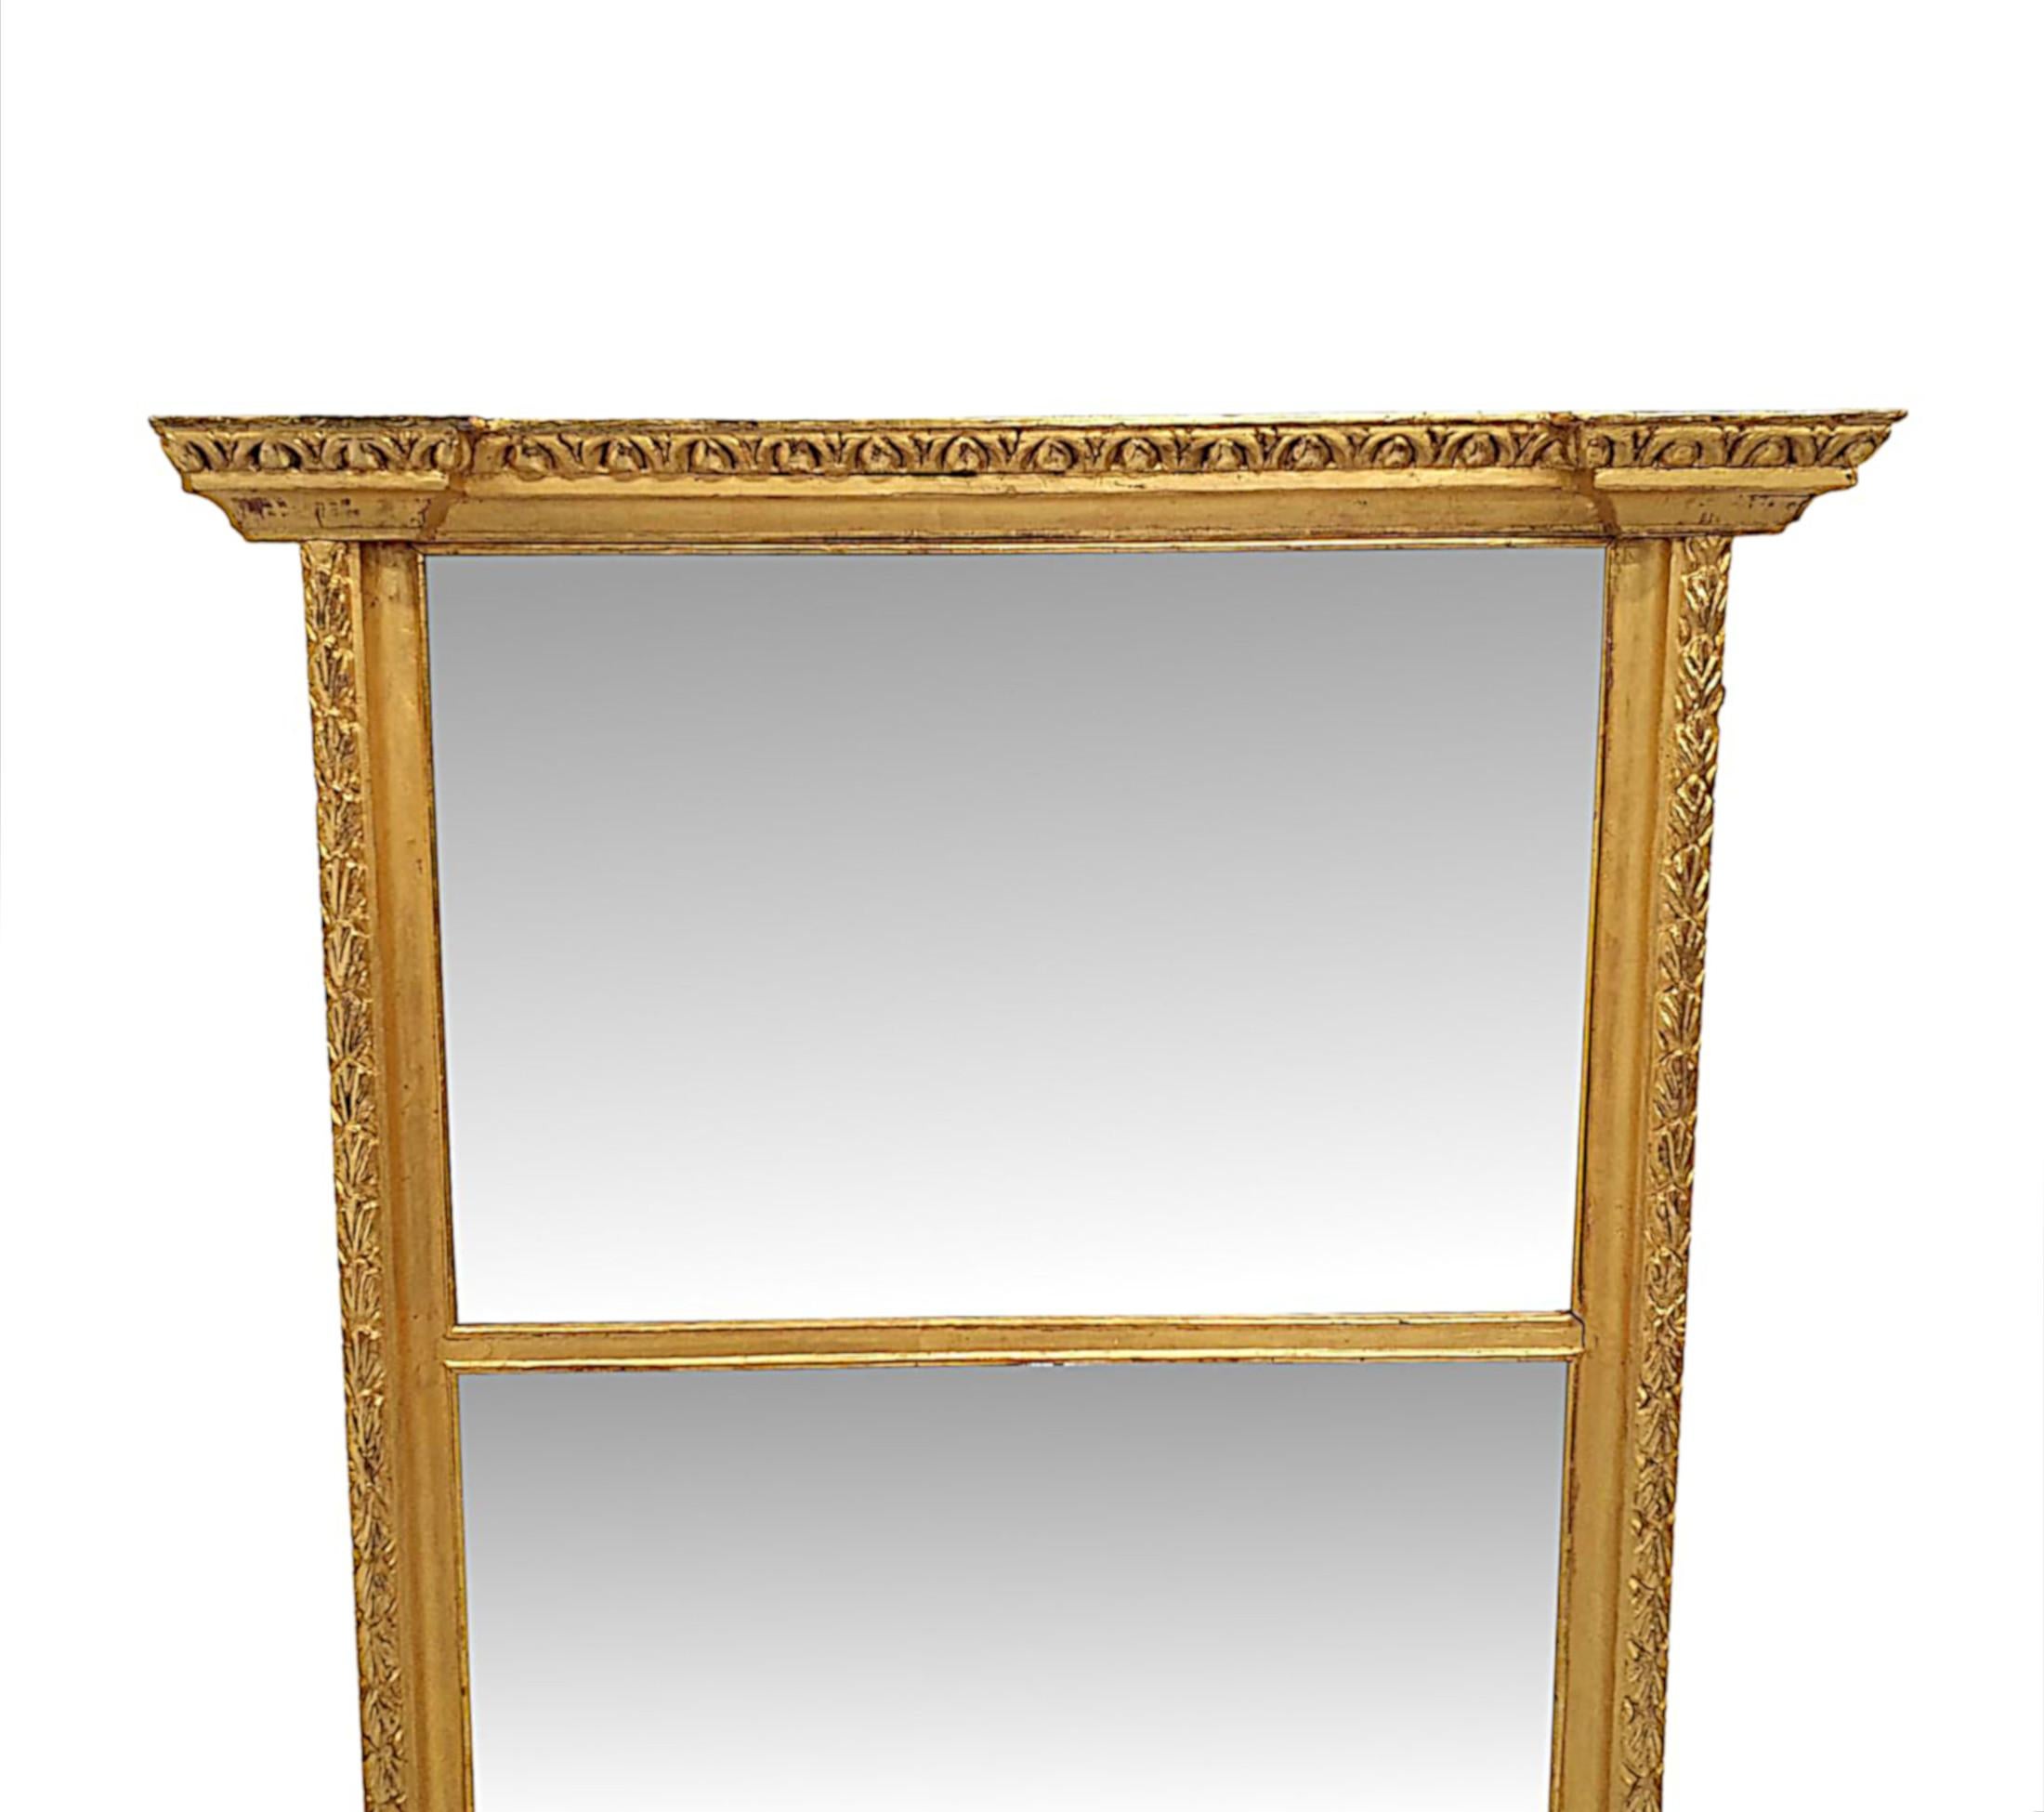 A very fine and unusual 19th Century compartmental overmantle mirror.  The two mirror glass plates of rectangular form are set within a fabulously hand carved moulded and reeded giltwood frame surmounted with a breakfront stepped overhanging cornice